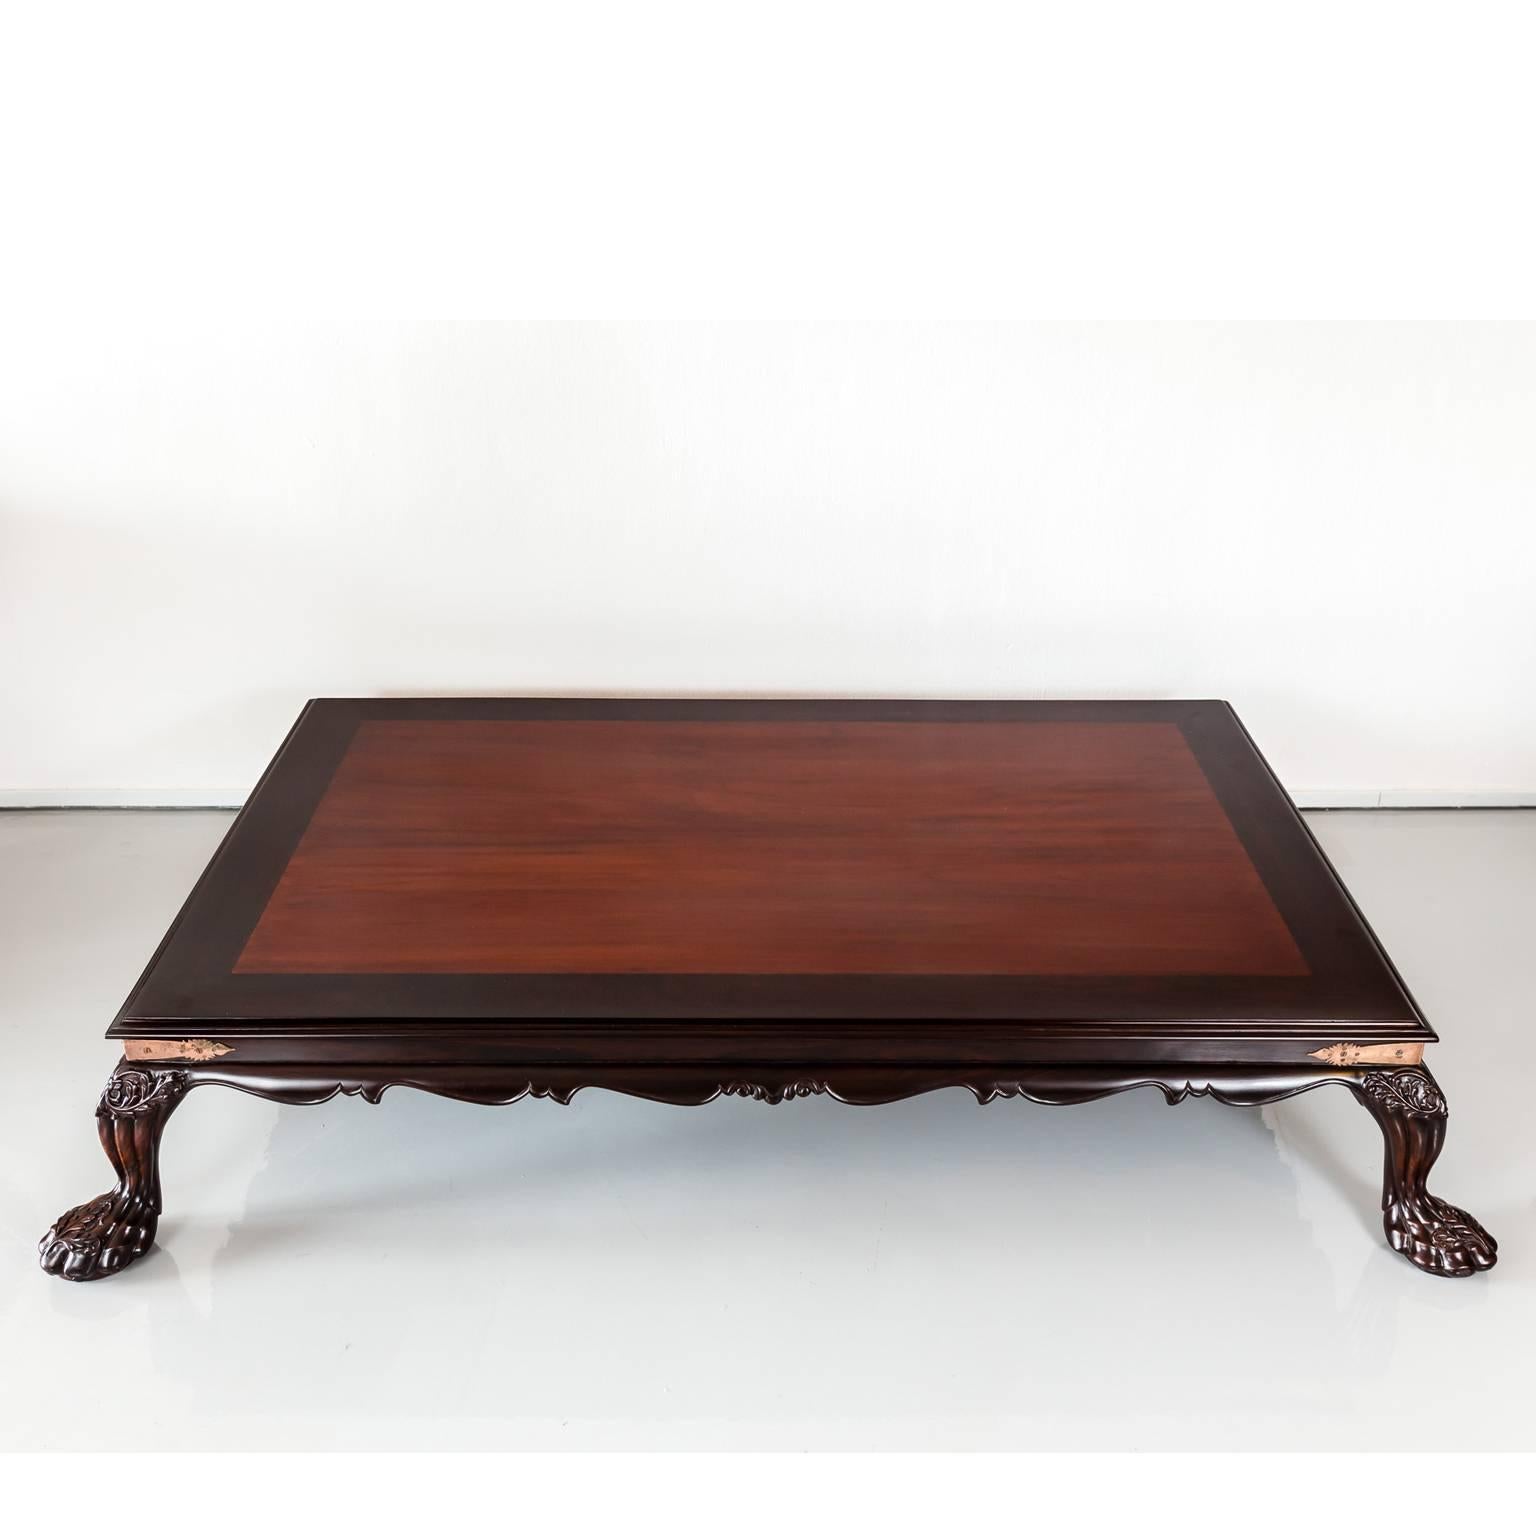 An impressive British Colonial rectangular rosewood coffee table with a nicely contrasting mahogany top. The apron on all four sides is serpentine shaped.
The table is supported on four cabriole legs, the knees carved with acanthus, terminating in